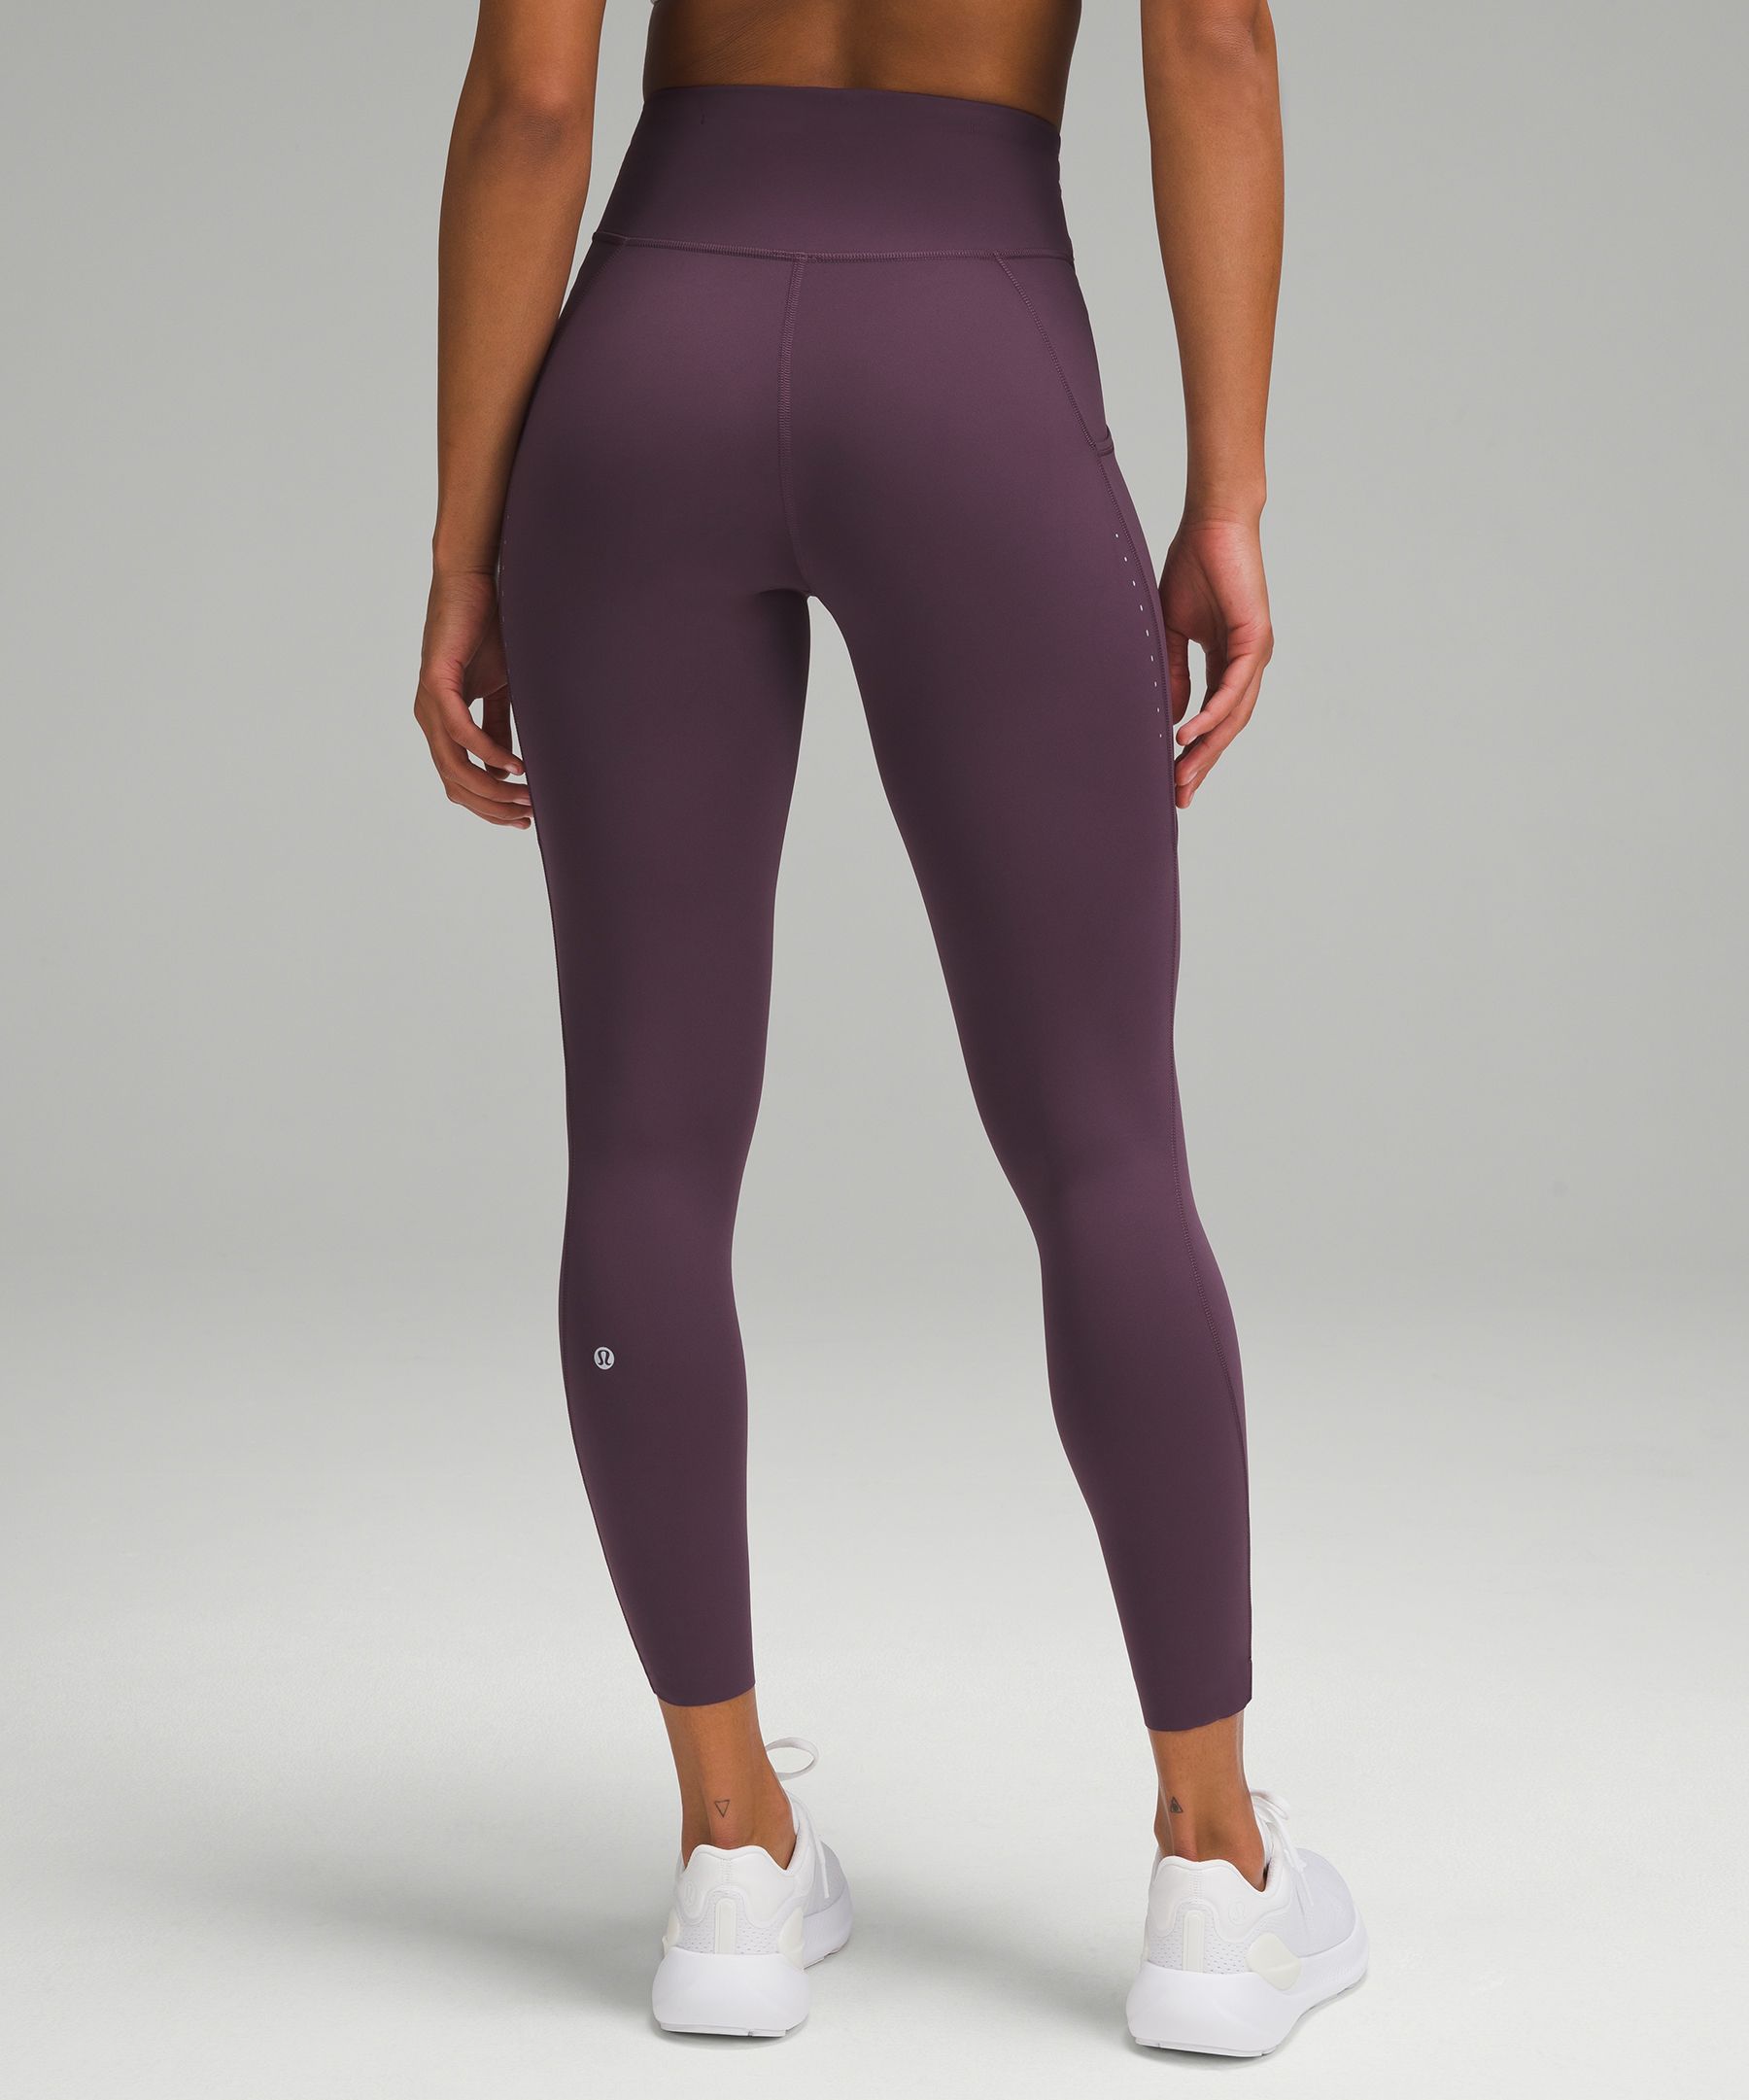 NWT Lululemon Fast and Free High-Rise Tight 25 *Nulux Symphony Blue